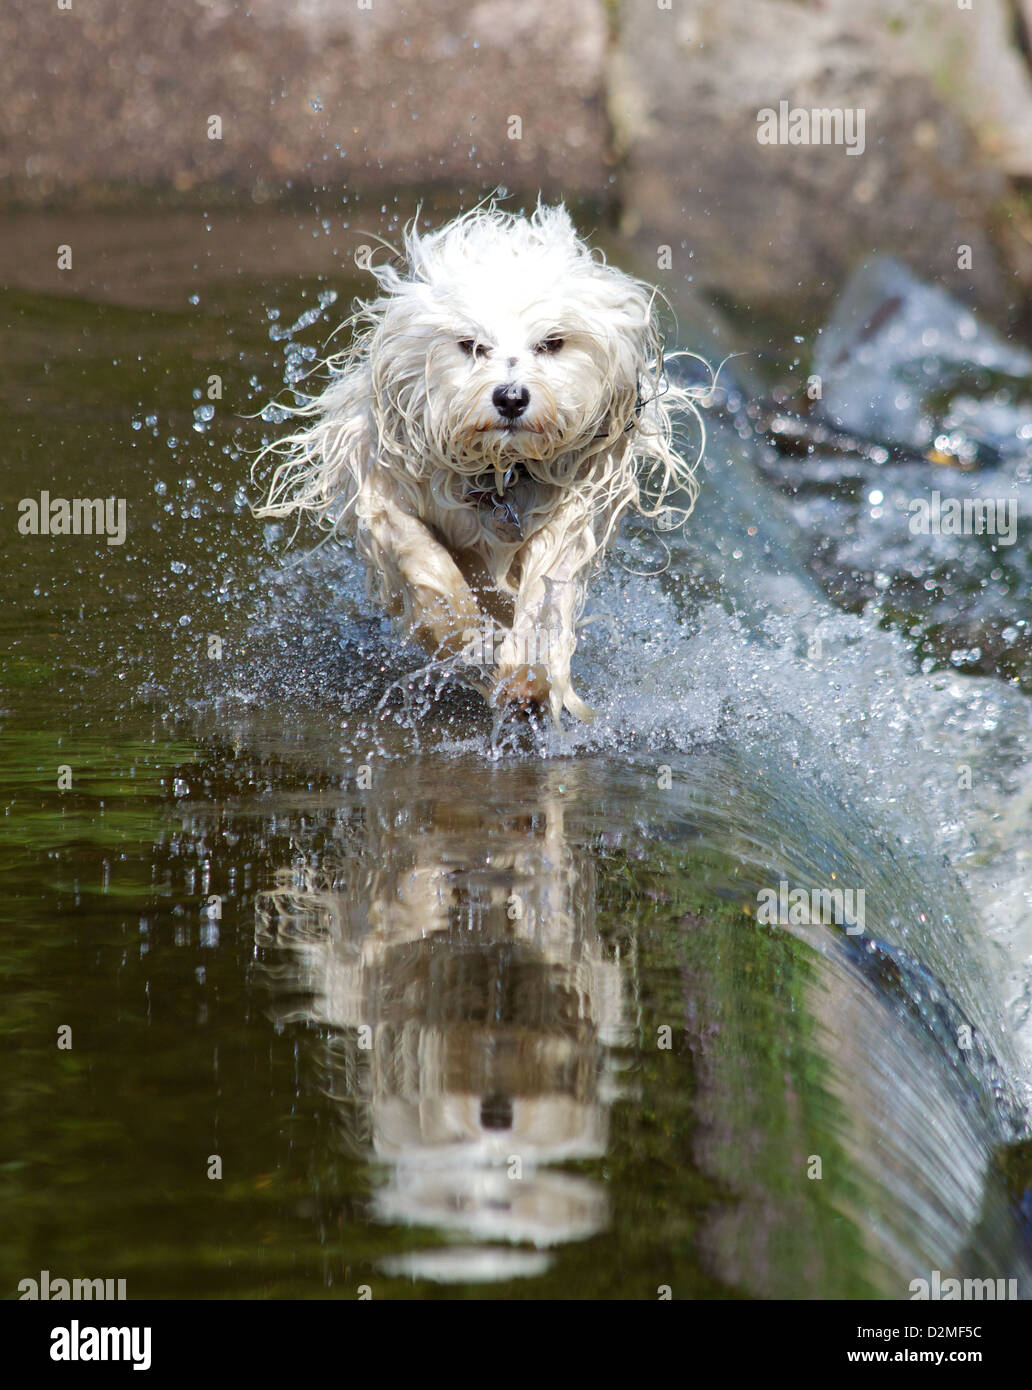 Little long-haired dog running through a body of water like the water splashes left and right of it, in the water, the dog is mi Stock Photo